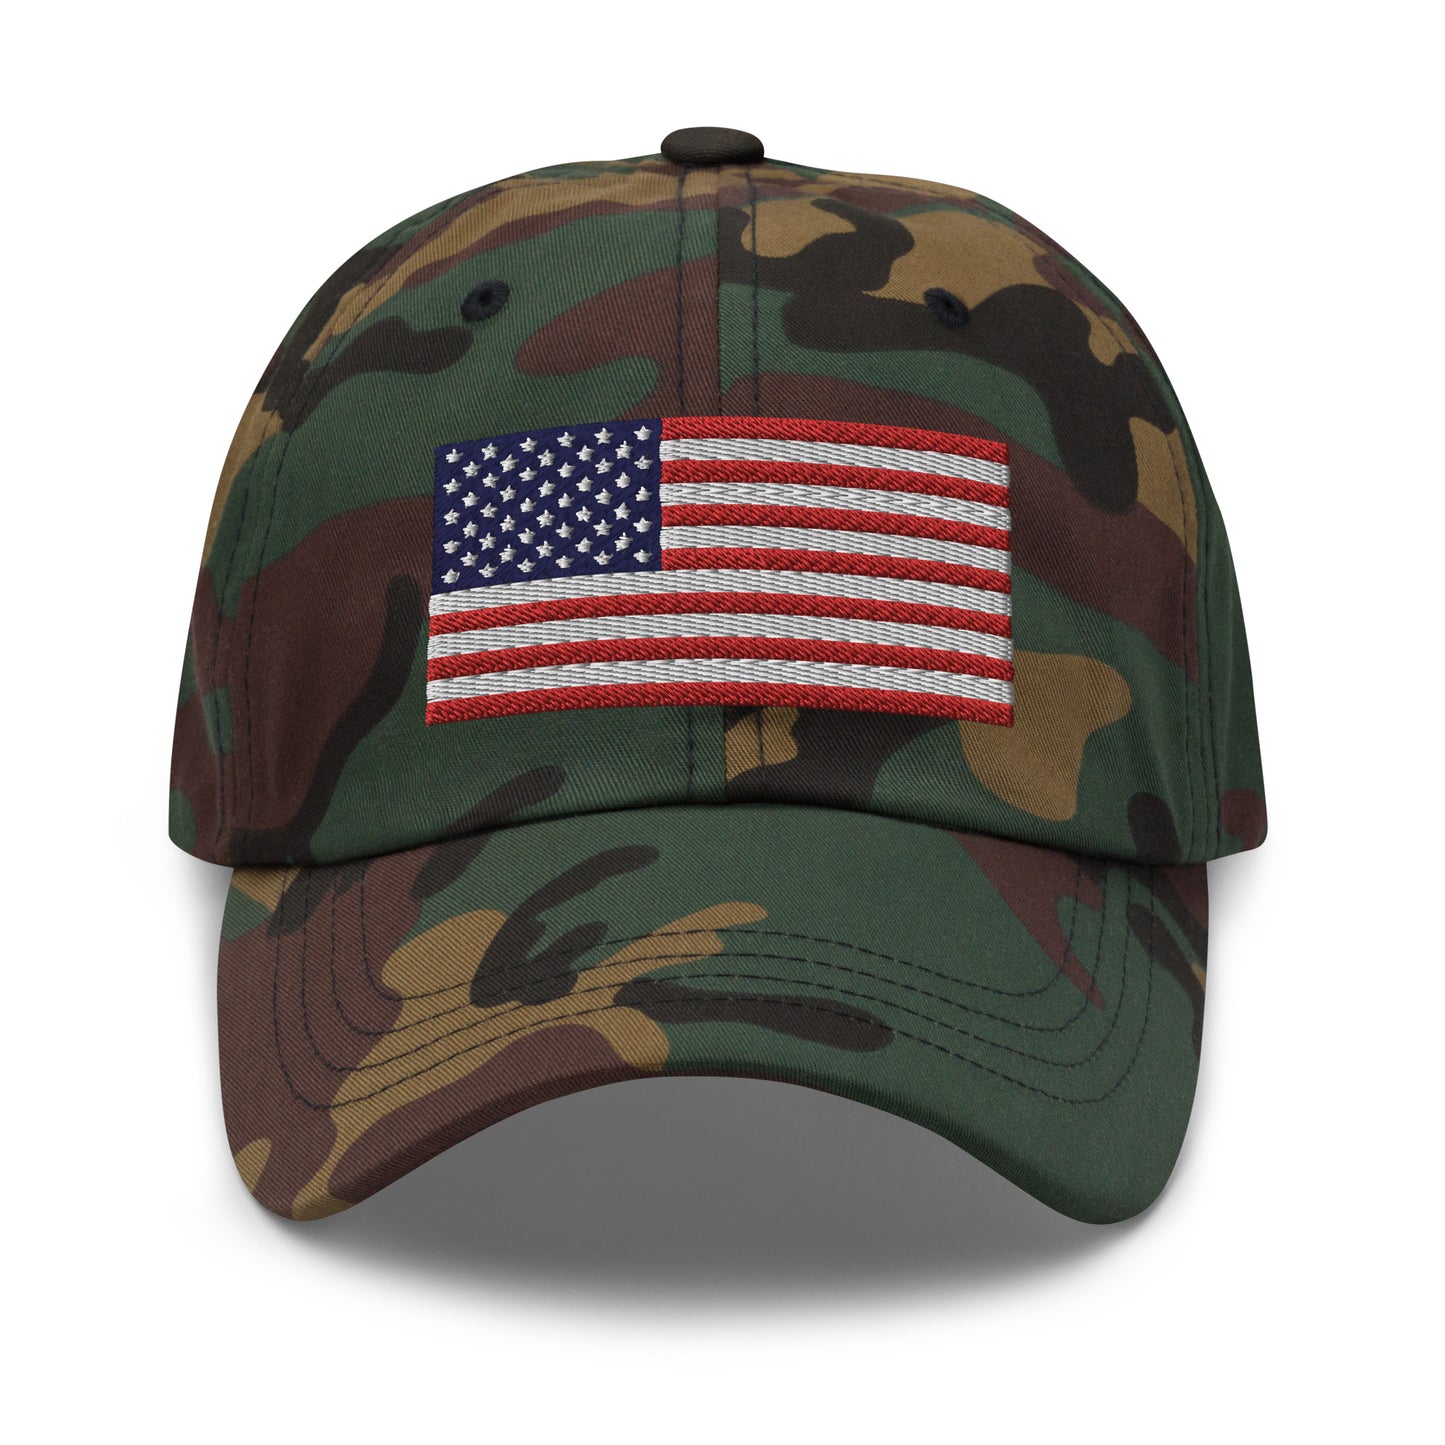 Show your patriotism with this embroidered USA dad hat, green camouflage color